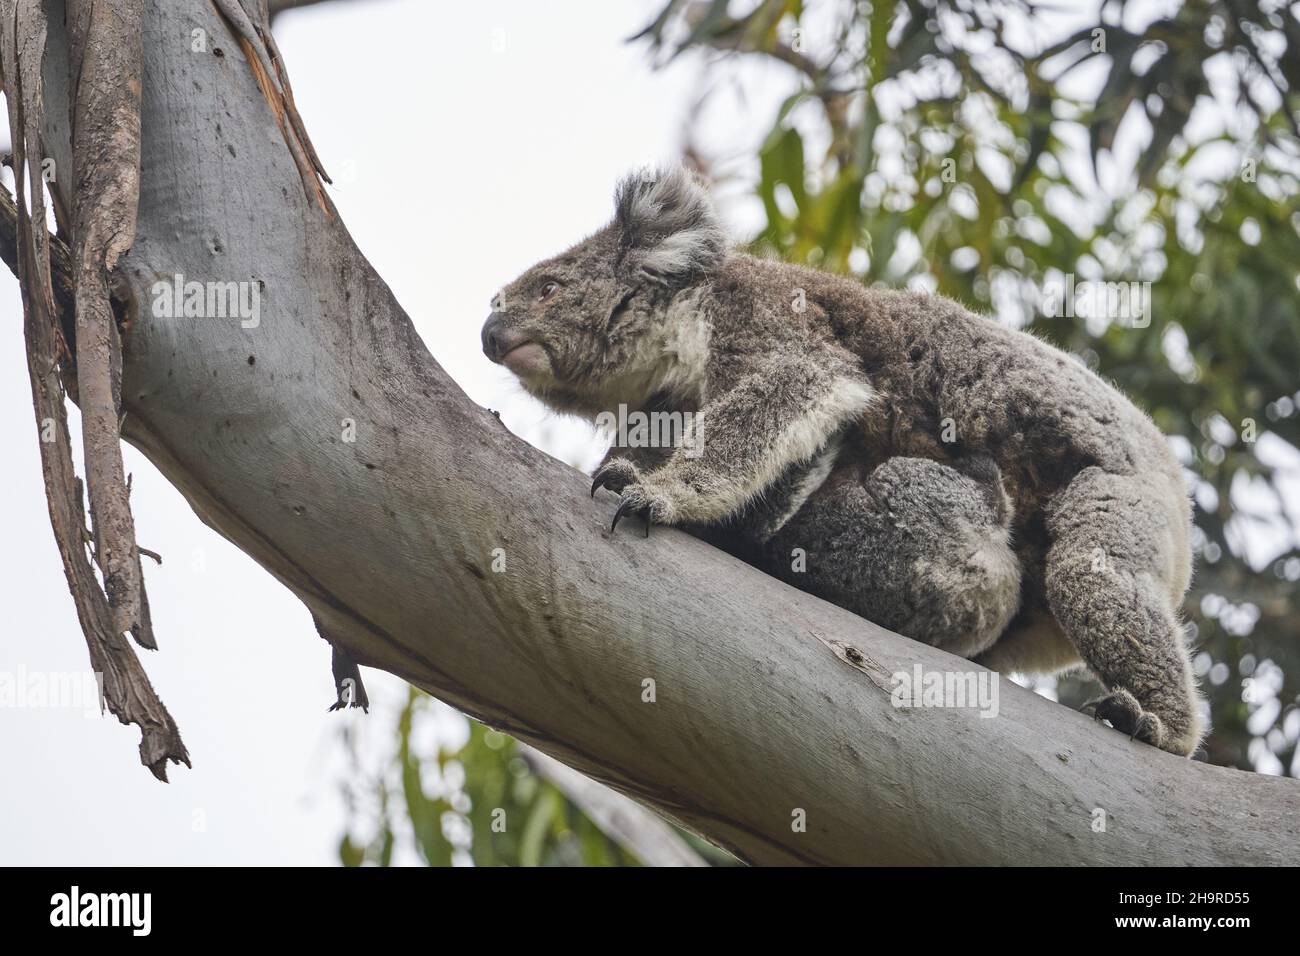 Cute koala with its baby at Kennett River, Great Ocean Road, Victoria Stock Photo